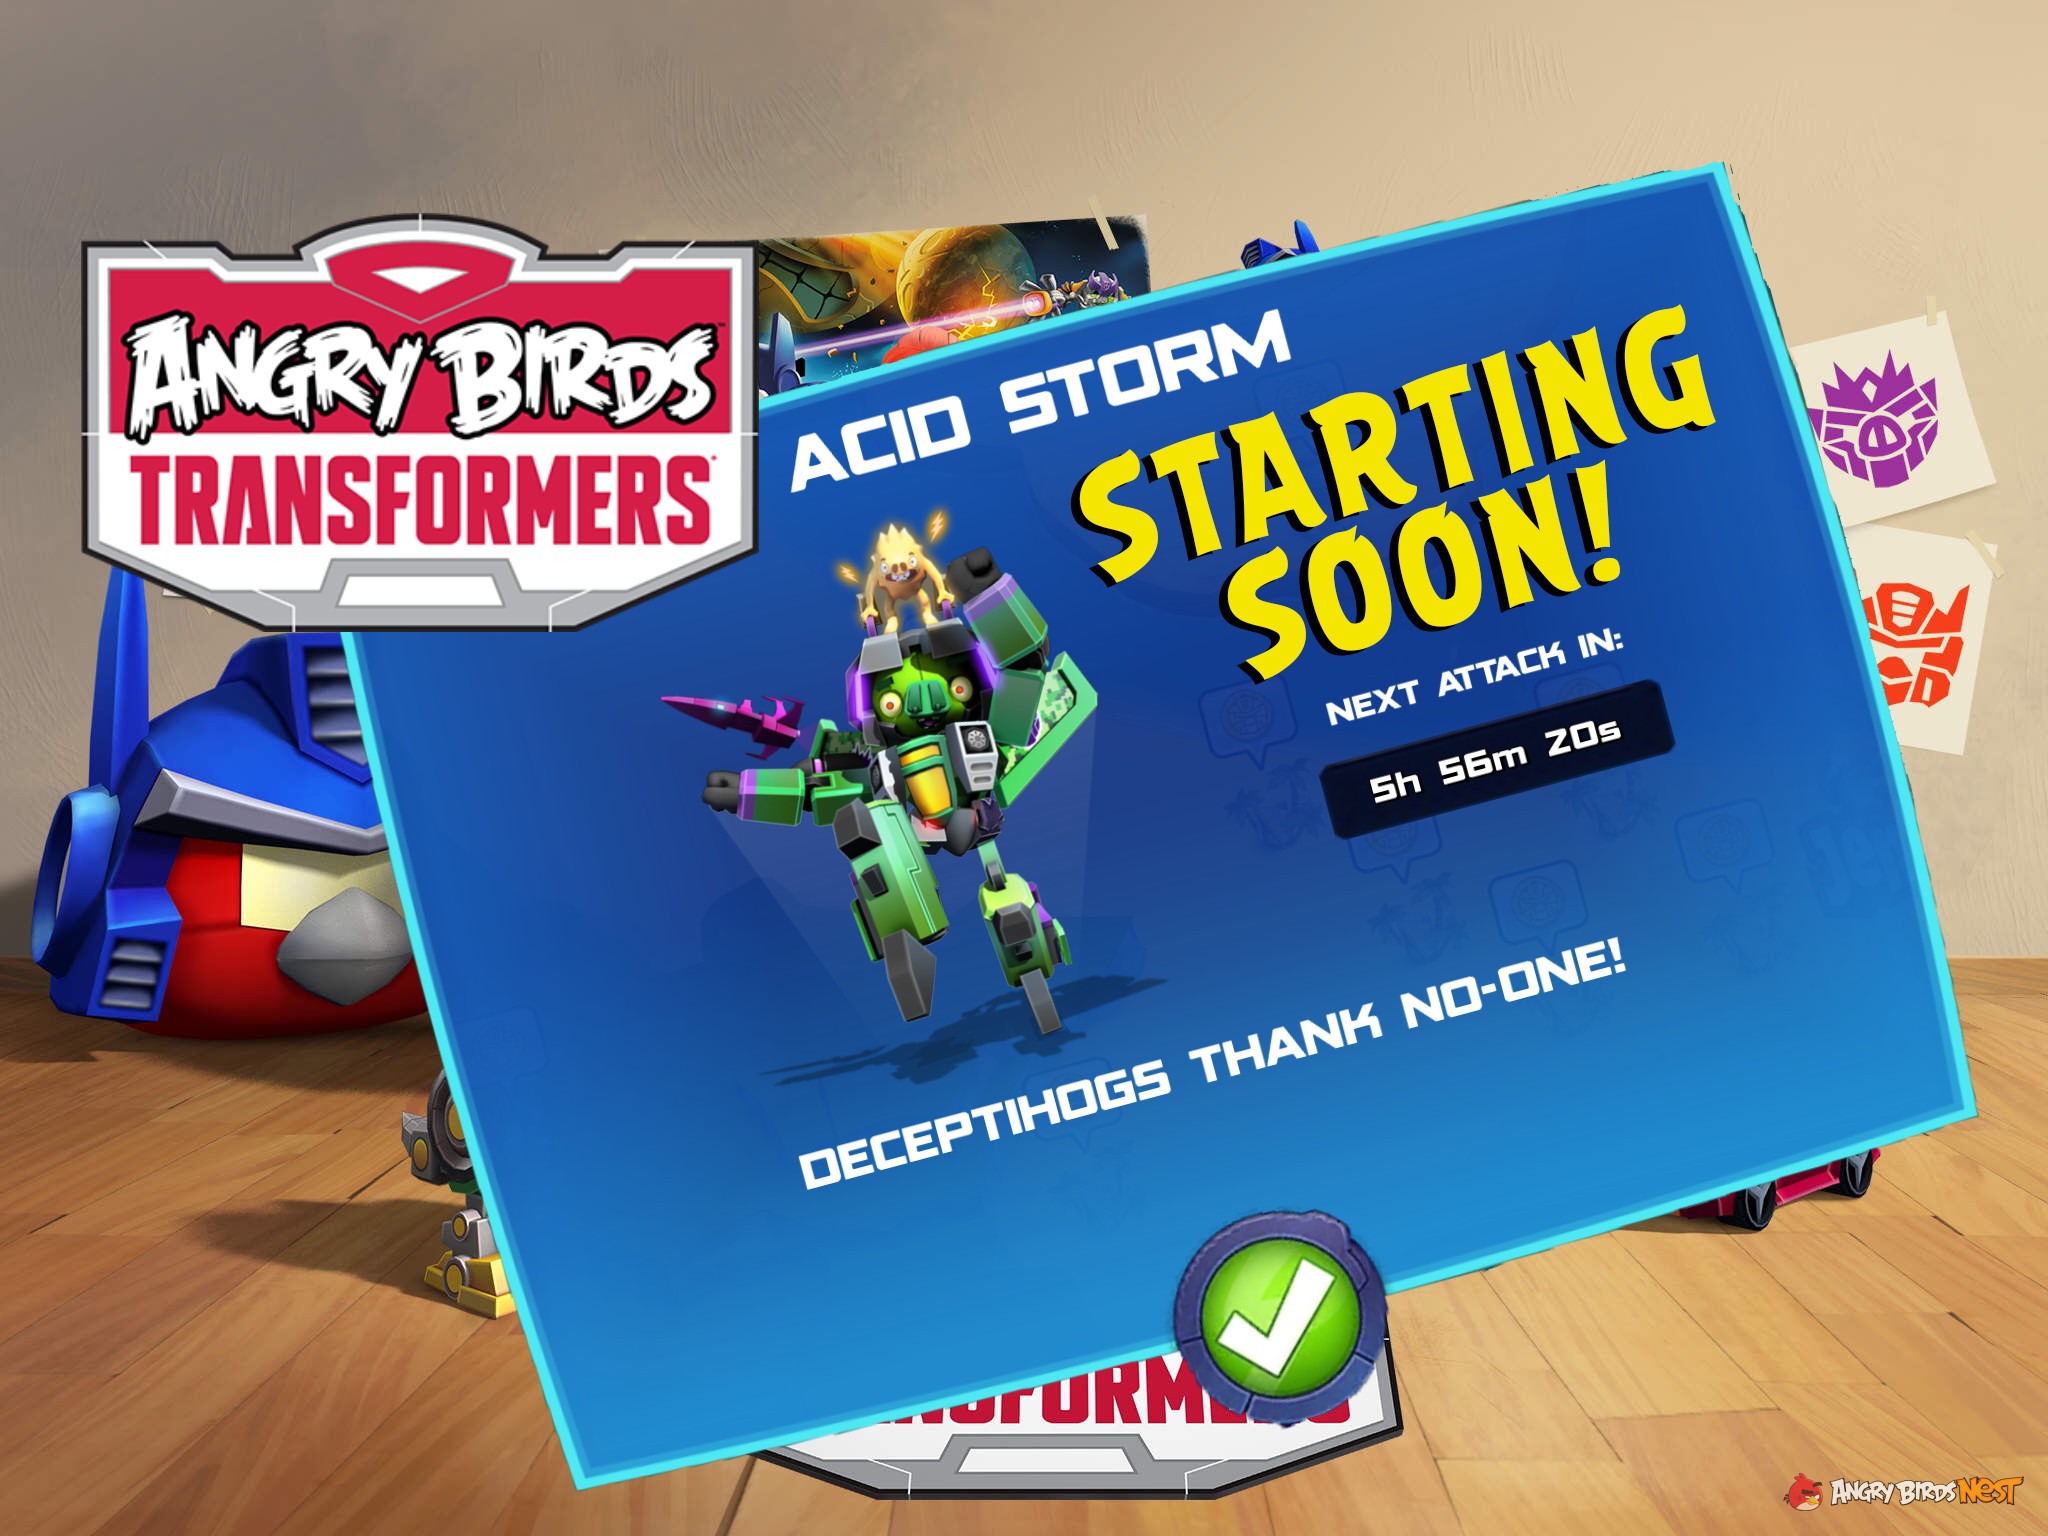 Angry-Birds-Transformers-Acid-Storm-Event-Starting-Soon